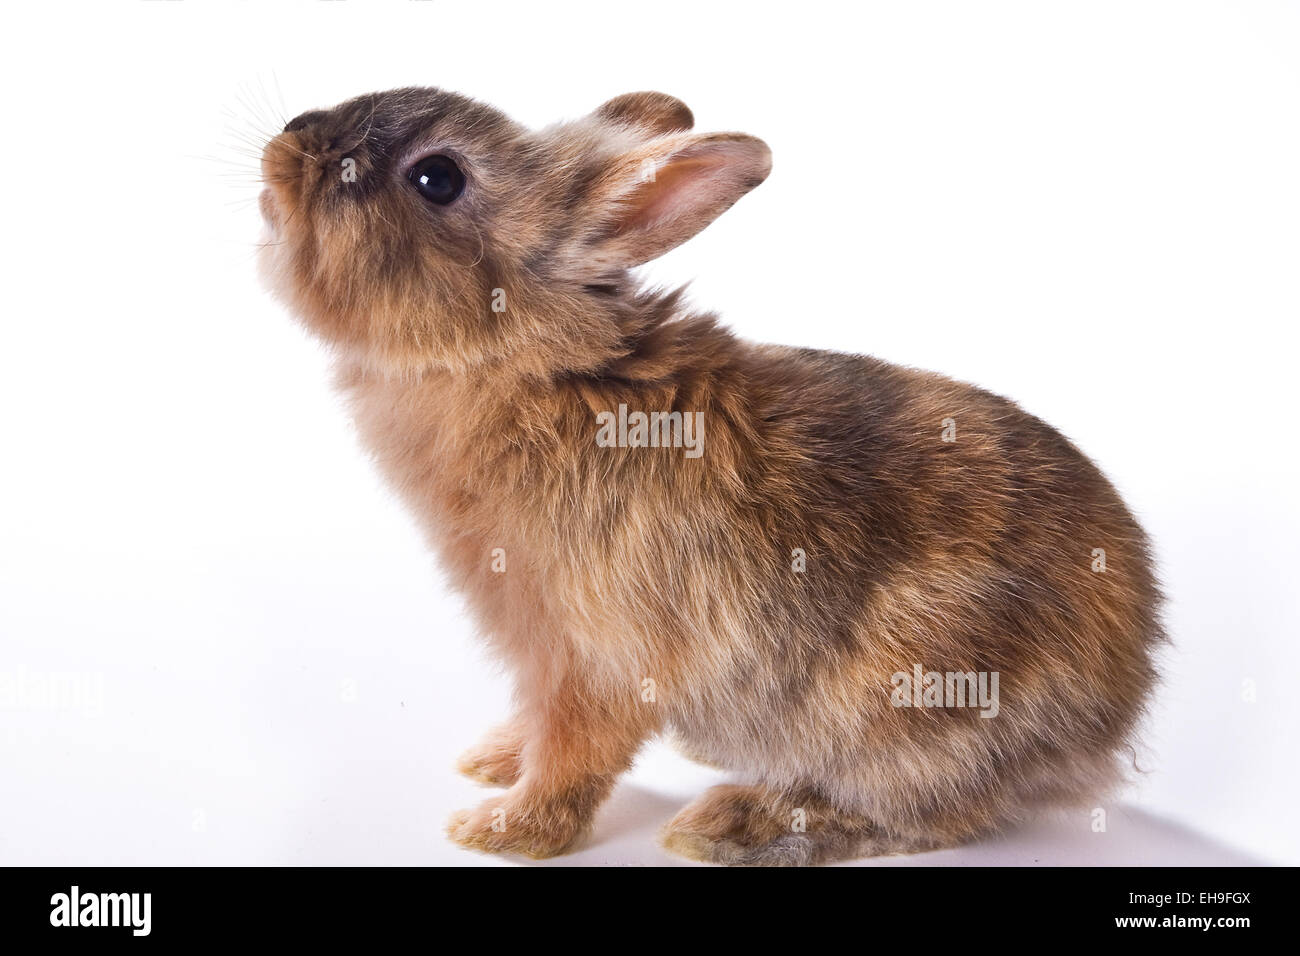 Six weeks old curious little brown rabbit Stock Photo